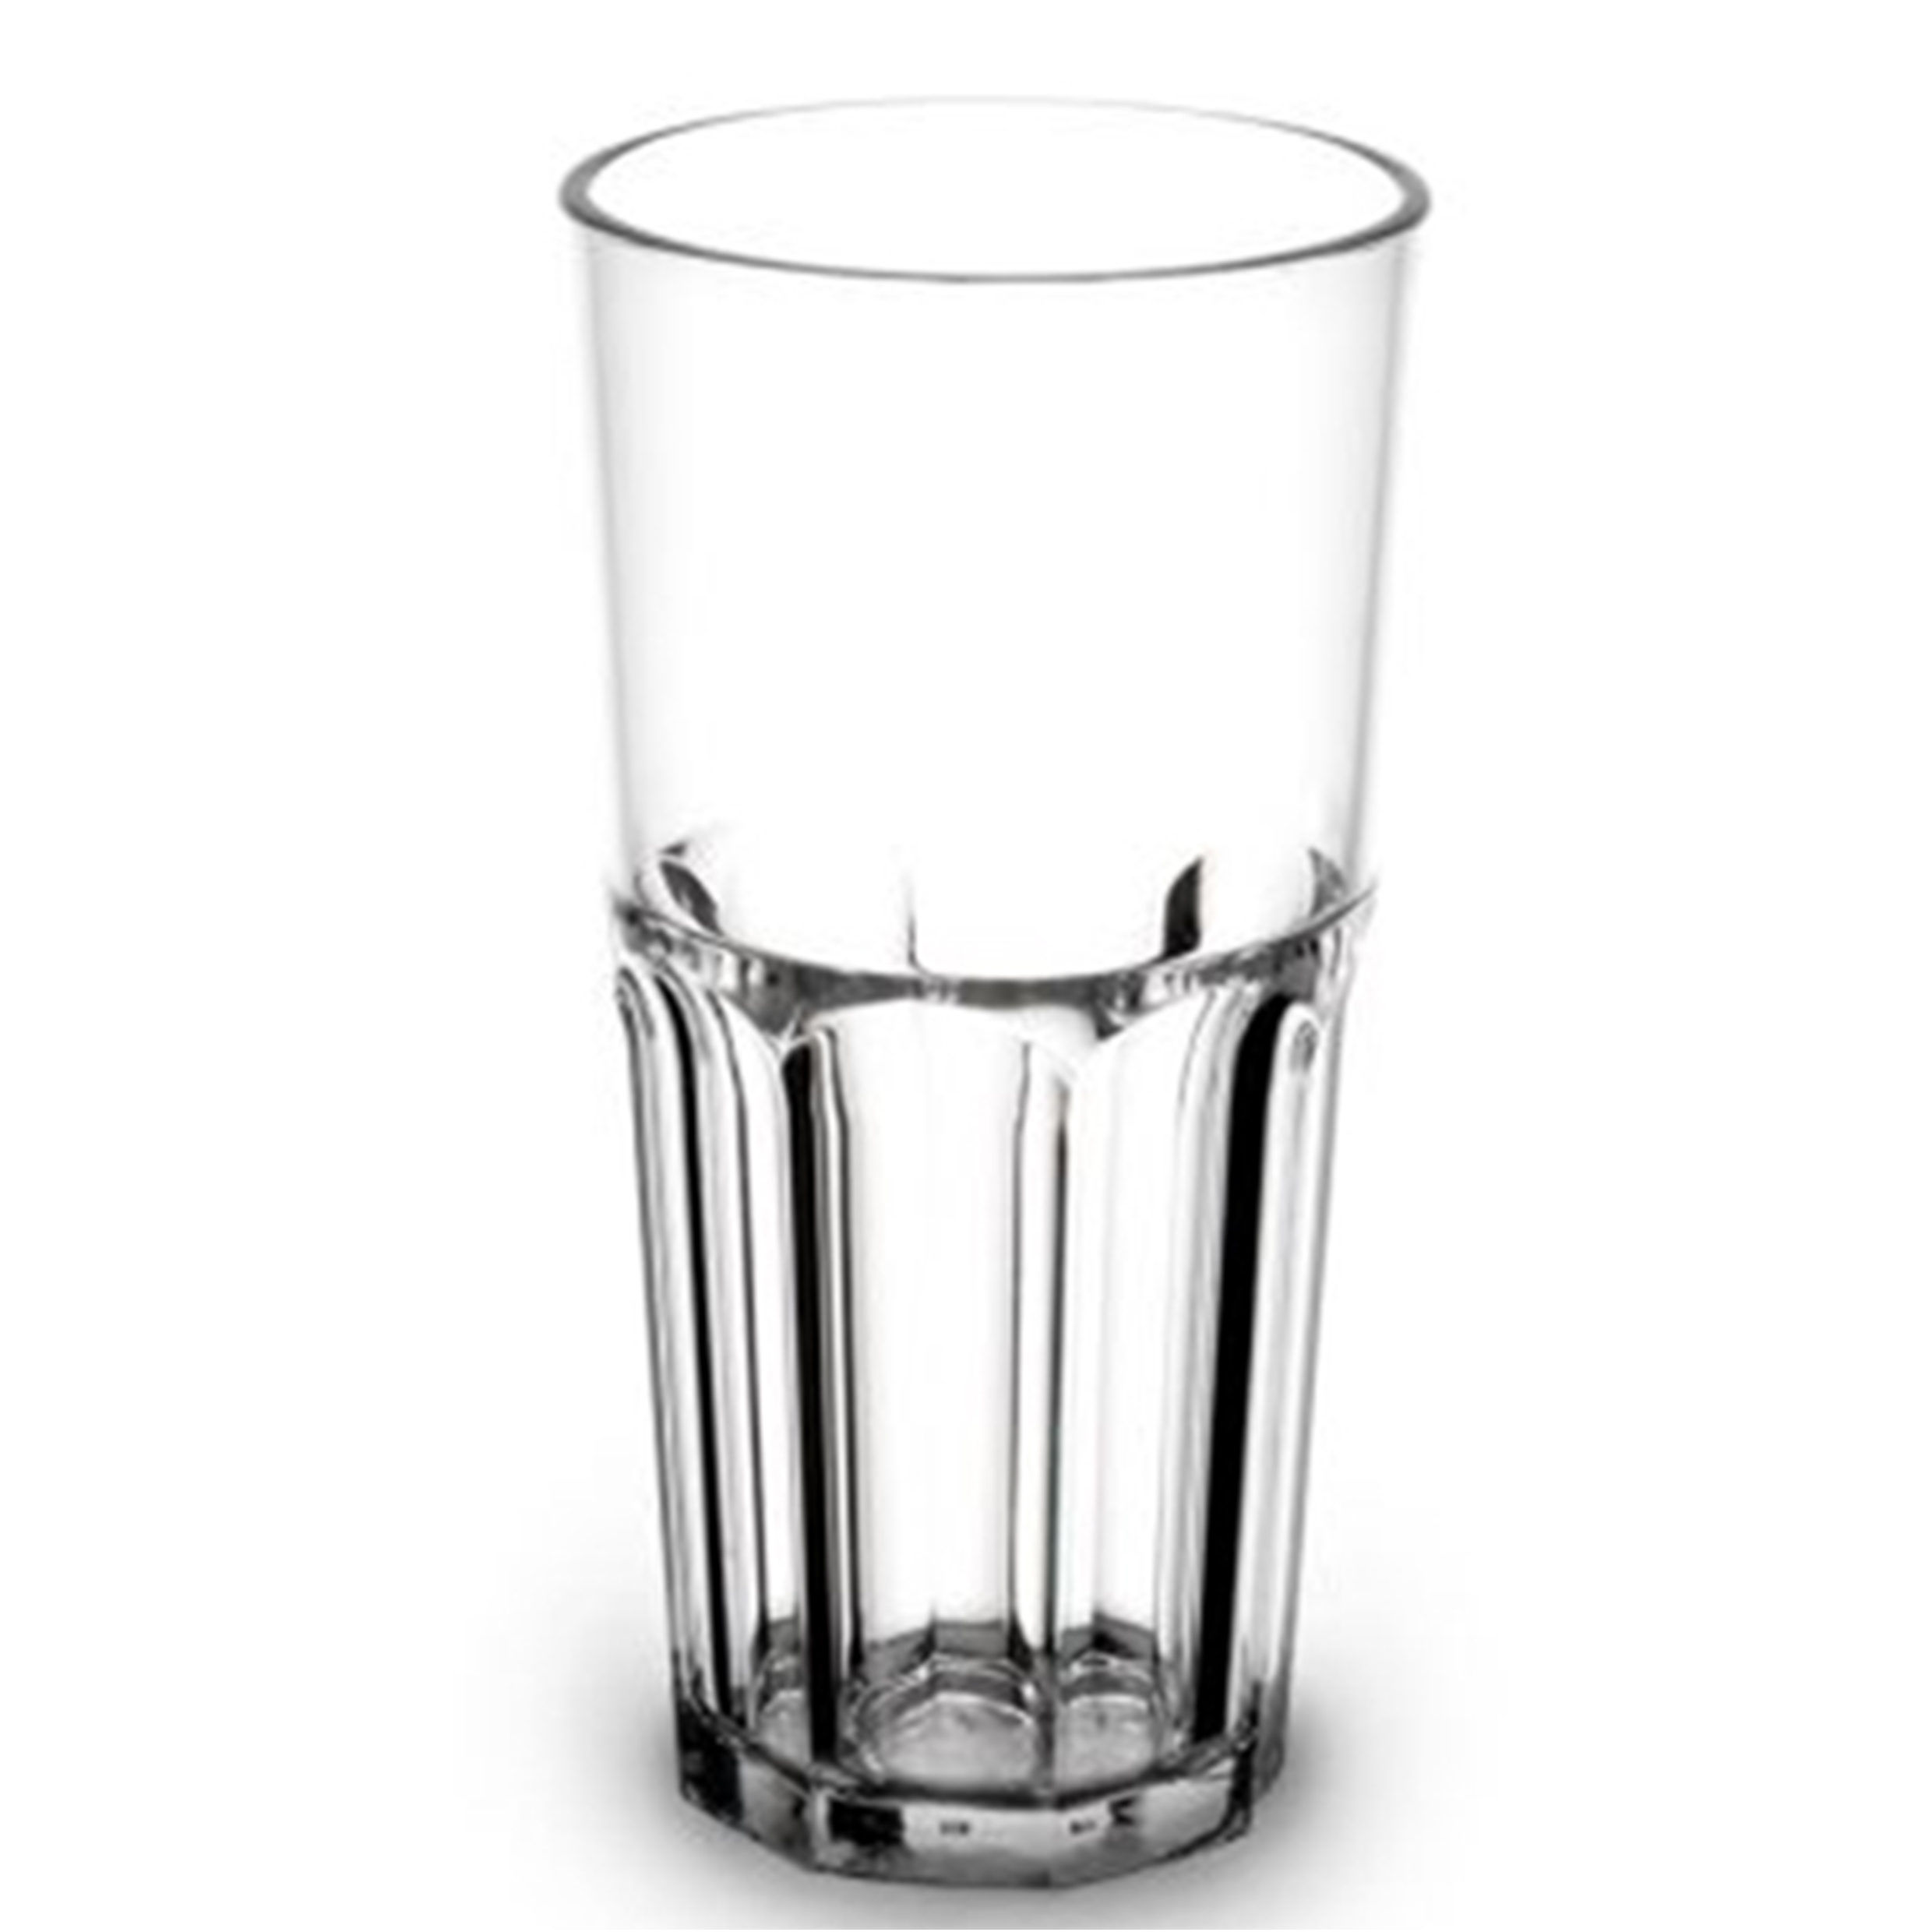 Personalized multifunction plastic glass (22 cl) - Serge